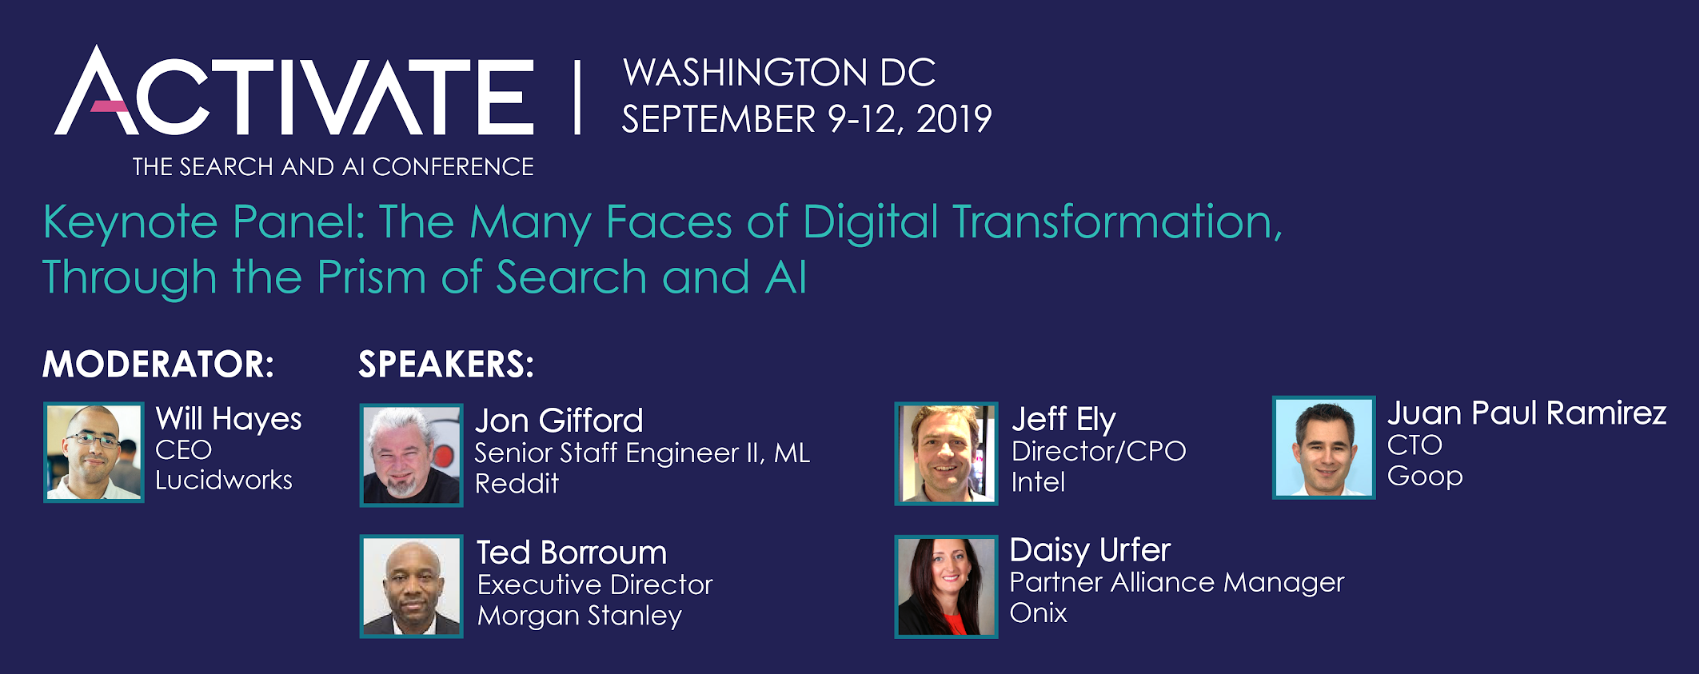 ACTIVATE 2019   Keynote: The Many Faces of Digital Transformation